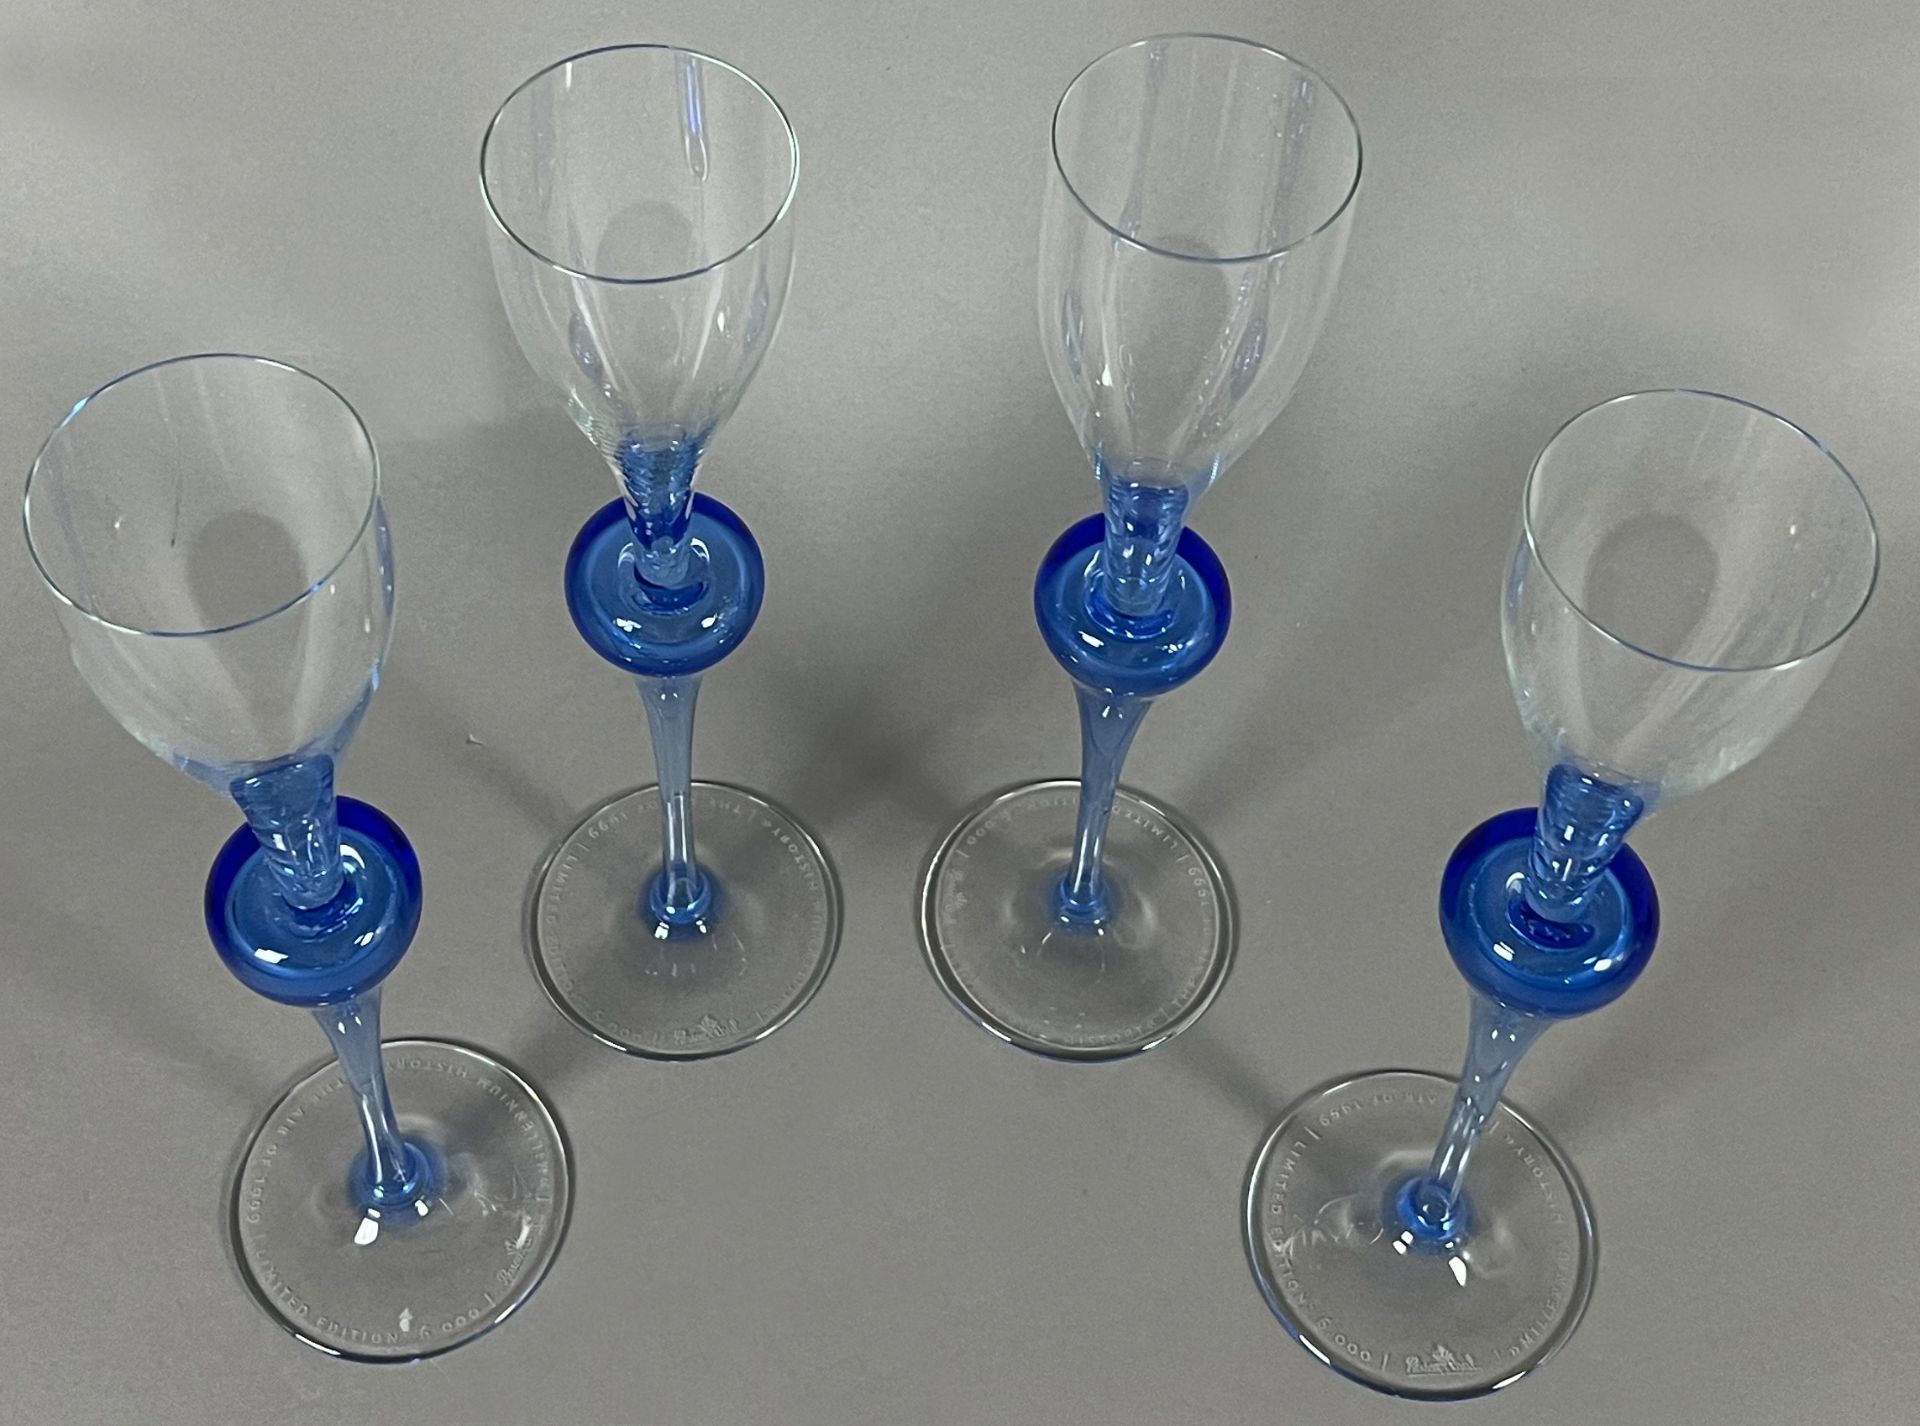 Four champagne flutes. ROSENTHAL. "Millennium History / The Air of 1999 / Limited Edition". - Image 3 of 6